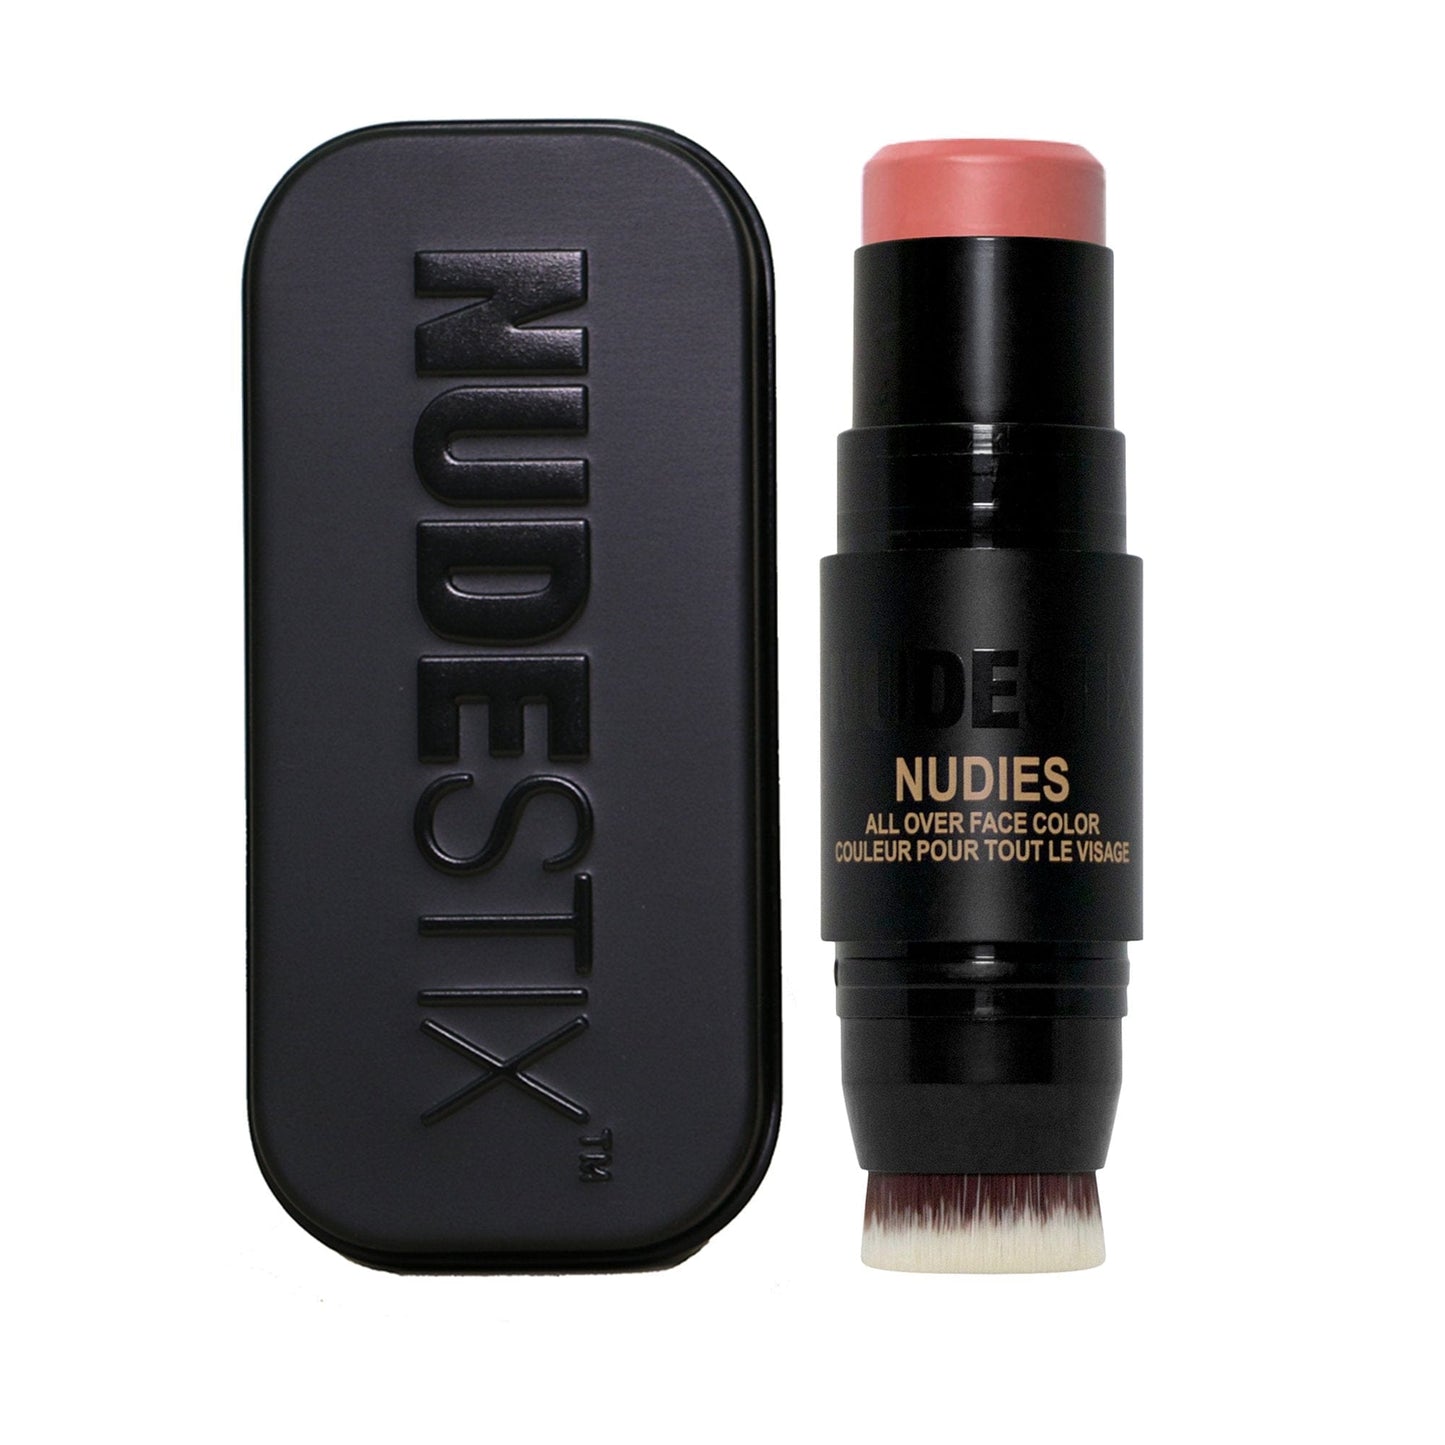 Nudies Blush Stick in shade Naughty N' Spice with Nudestix can